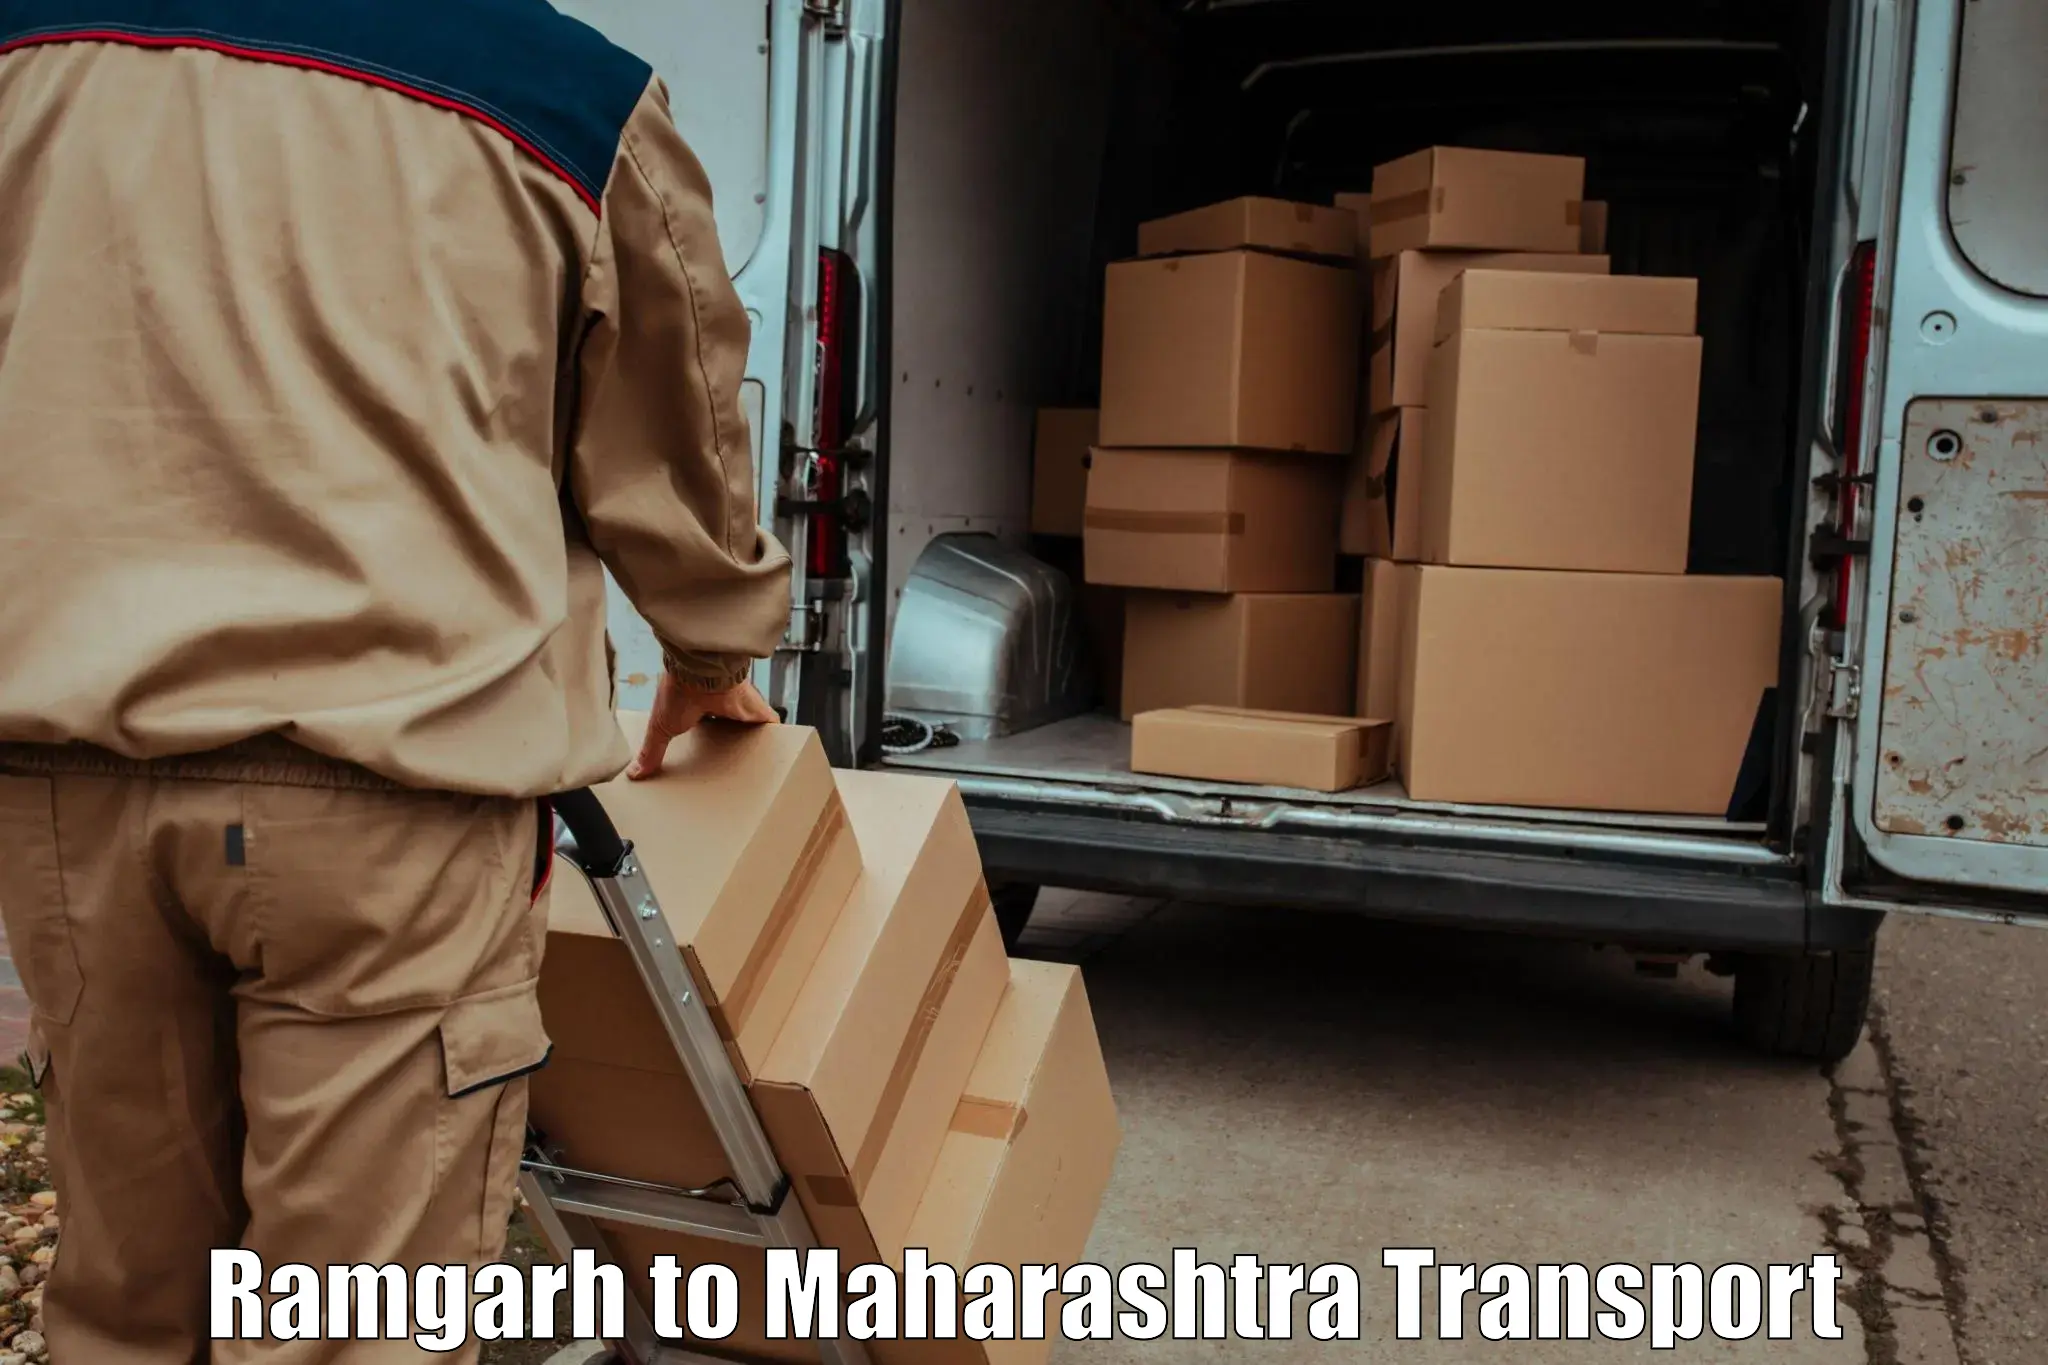 Vehicle transport services in Ramgarh to Ballarpur